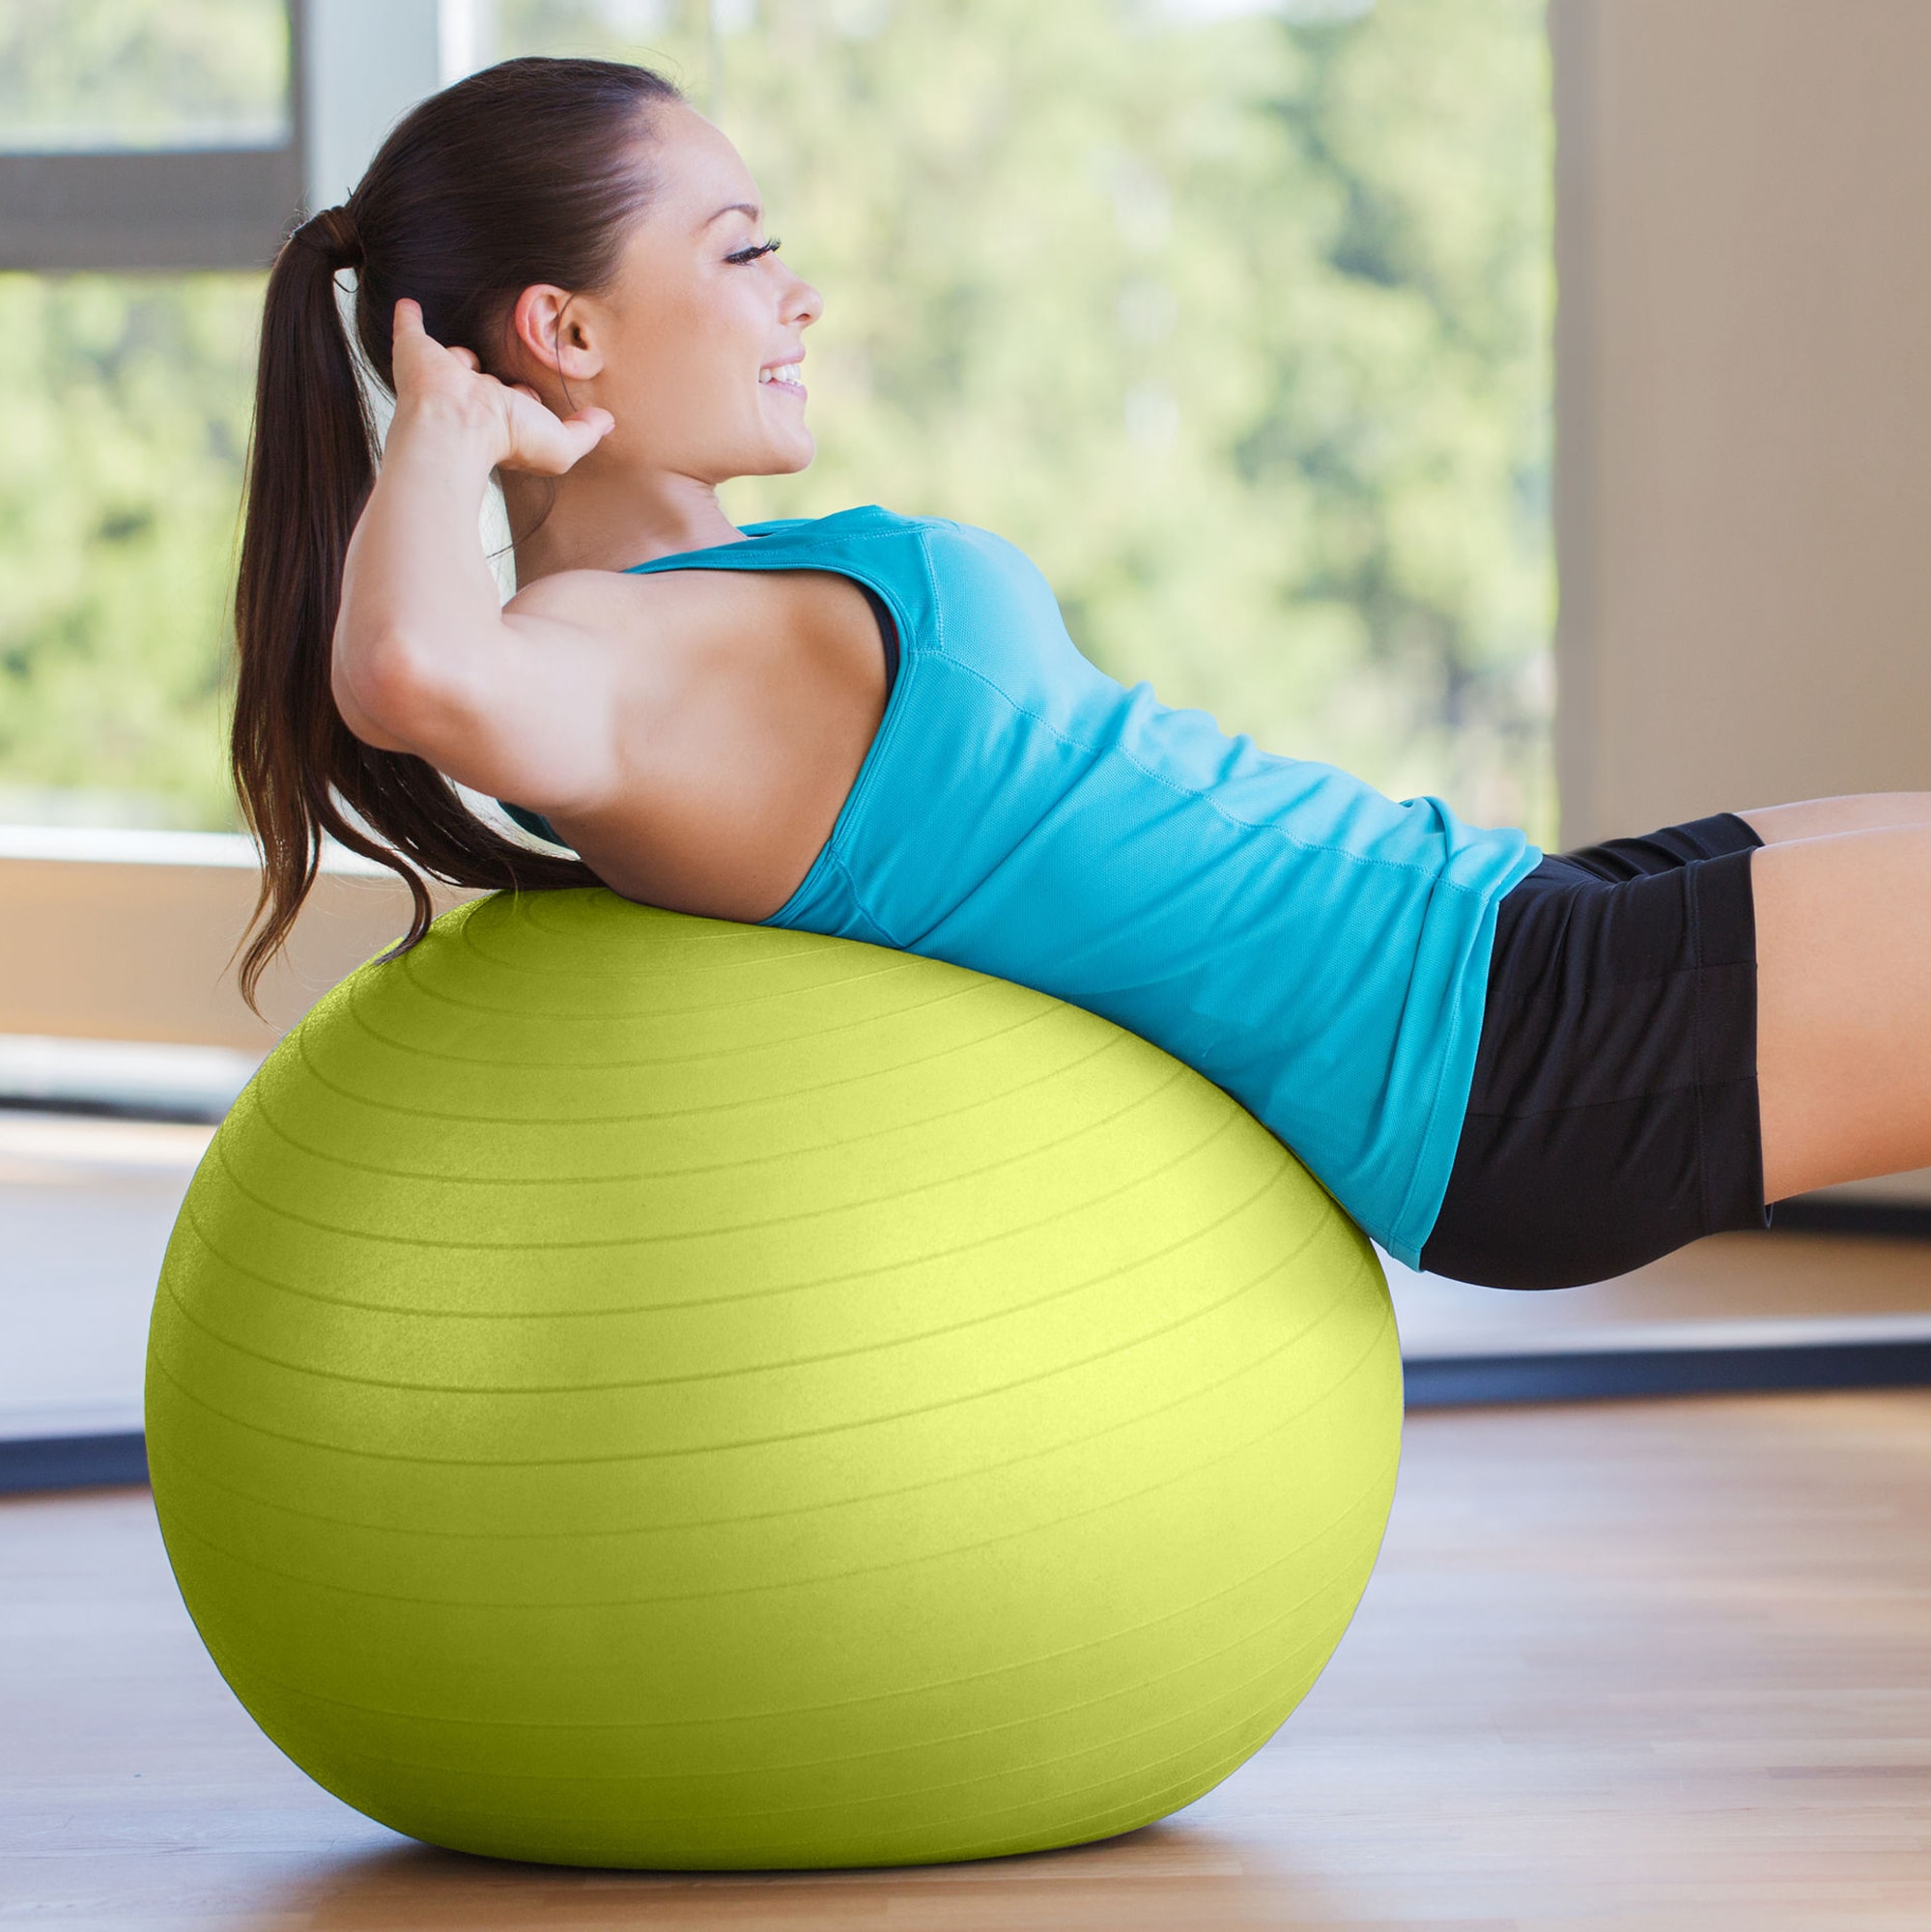 A $1,300 Yoga Ball Tests the Limits of Fashionable Functionality - Bloomberg